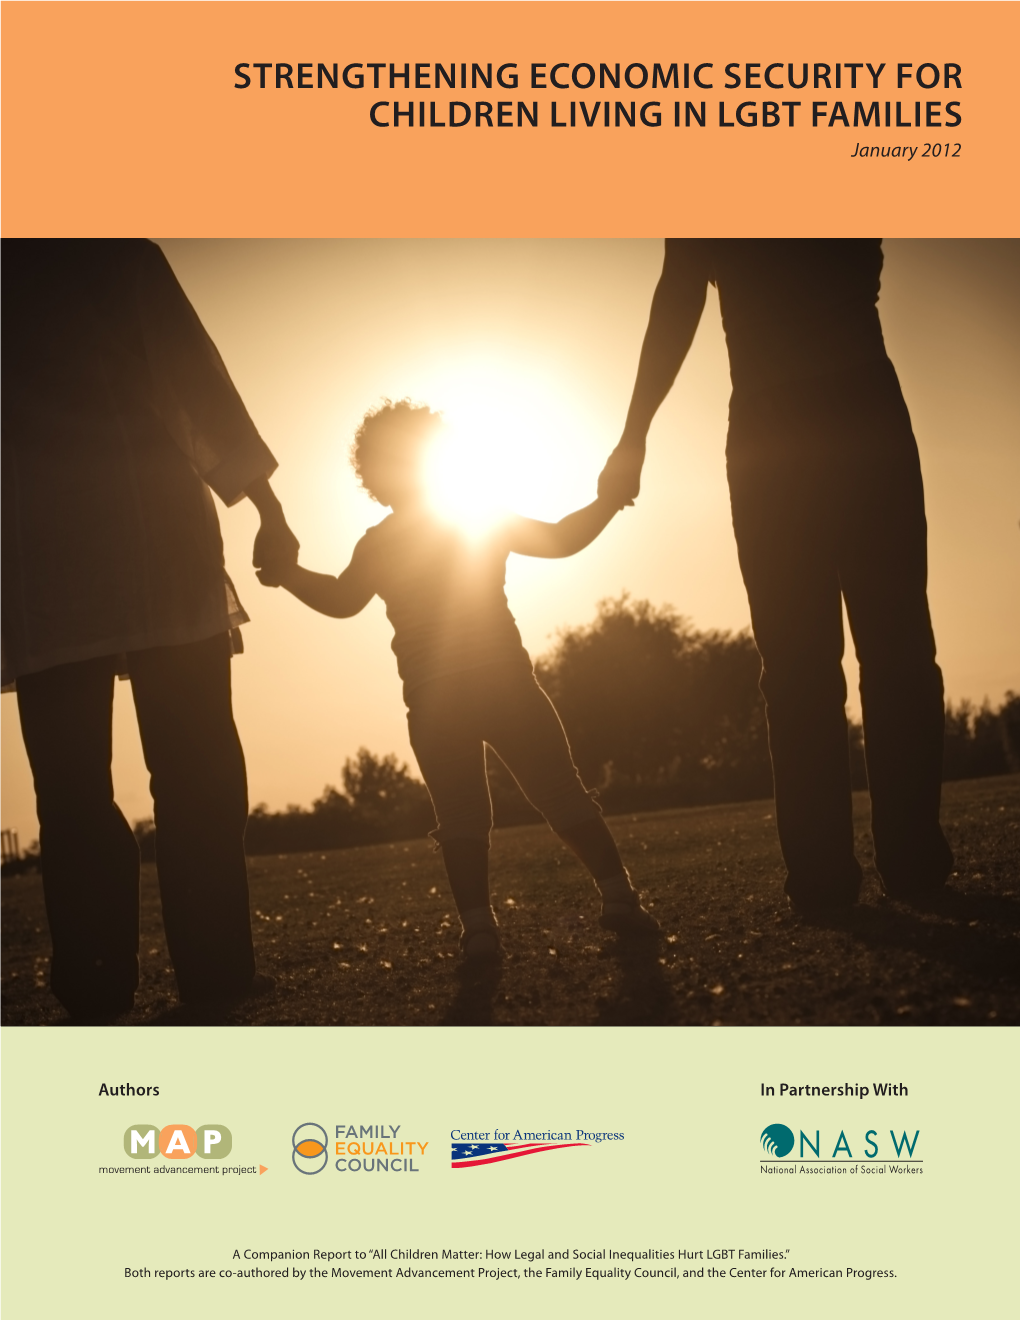 STRENGTHENING ECONOMIC SECURITY for CHILDREN LIVING in LGBT FAMILIES January 2012